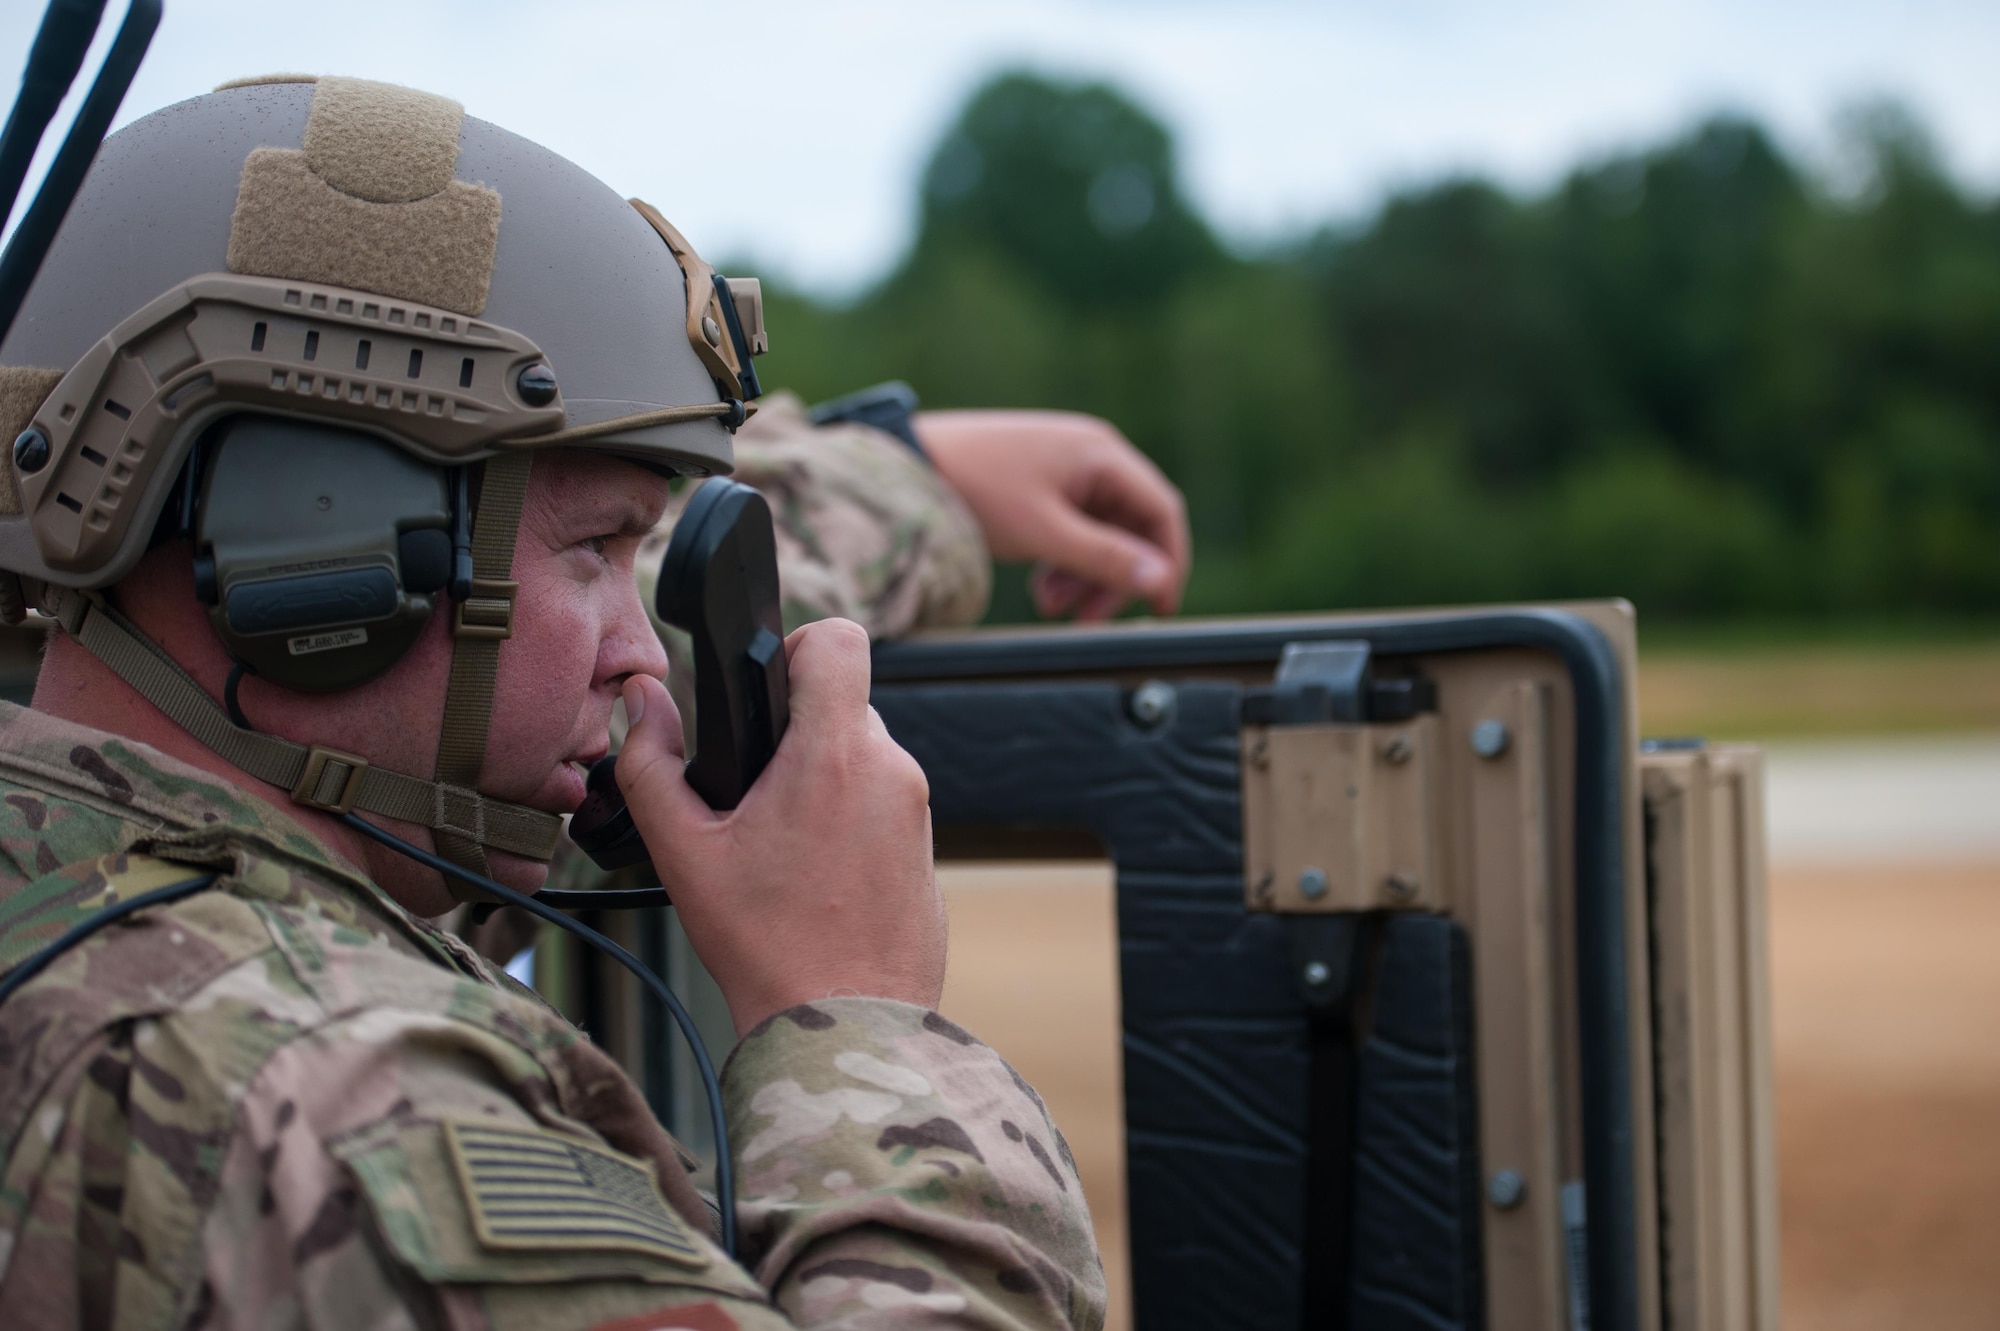 Maj. Aaron Cook, a 621st Mobility Support Operations Squadron air mobility liaison officer to the 2nd Cavalry Regiment/Joint Multinational Training Center, advises a C-130J Super Hercules pilot during exercise Swift Response 16 at Hohenfels Training Area, Germany, June 17, 2016. Swift Response is one of the premier military crisis response training events for multinational airborne forces in the world. This year, the exercise had more than 5,000 participants from 10 NATO nations. (U.S. Air Force photo/Master Sgt. Joseph Swafford)